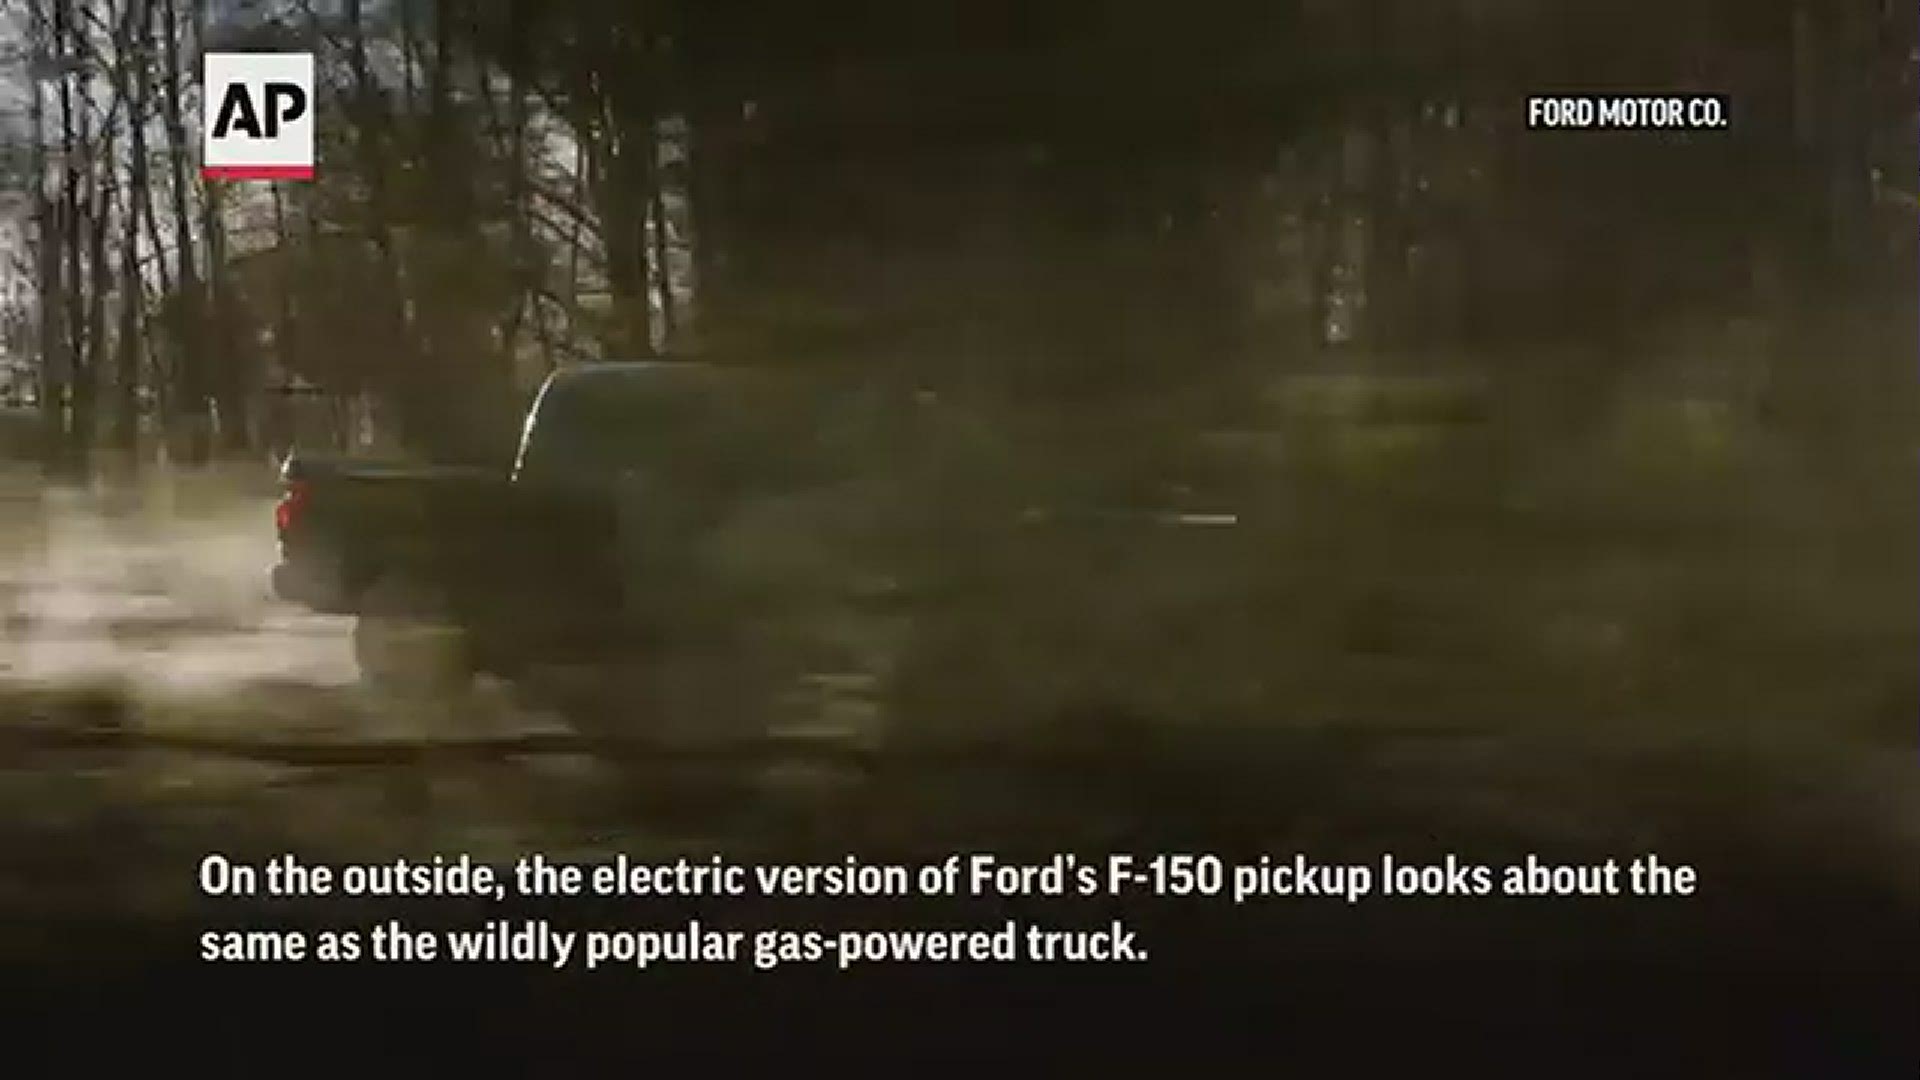 With its new battery-powered truck, Ford is making a costly bet that buyers will embrace a vehicle that would help transform how the world drives.